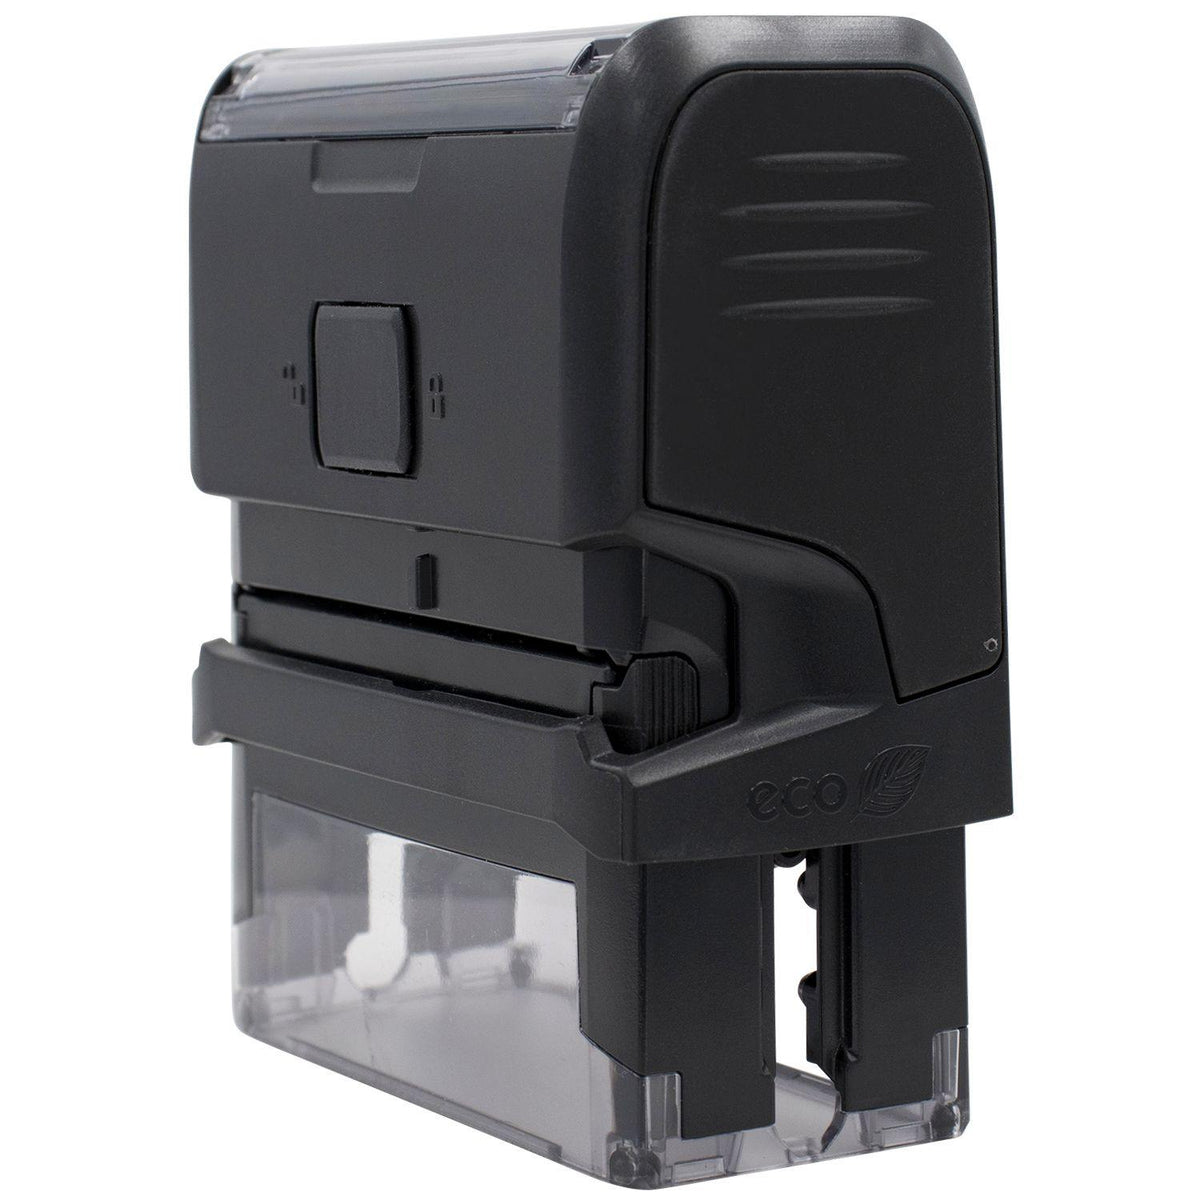 Large Self Inking Validated Stamp - Engineer Seal Stamps - Brand_Trodat, Impression Size_Large, Stamp Type_Self-Inking Stamp, Type of Use_Finance